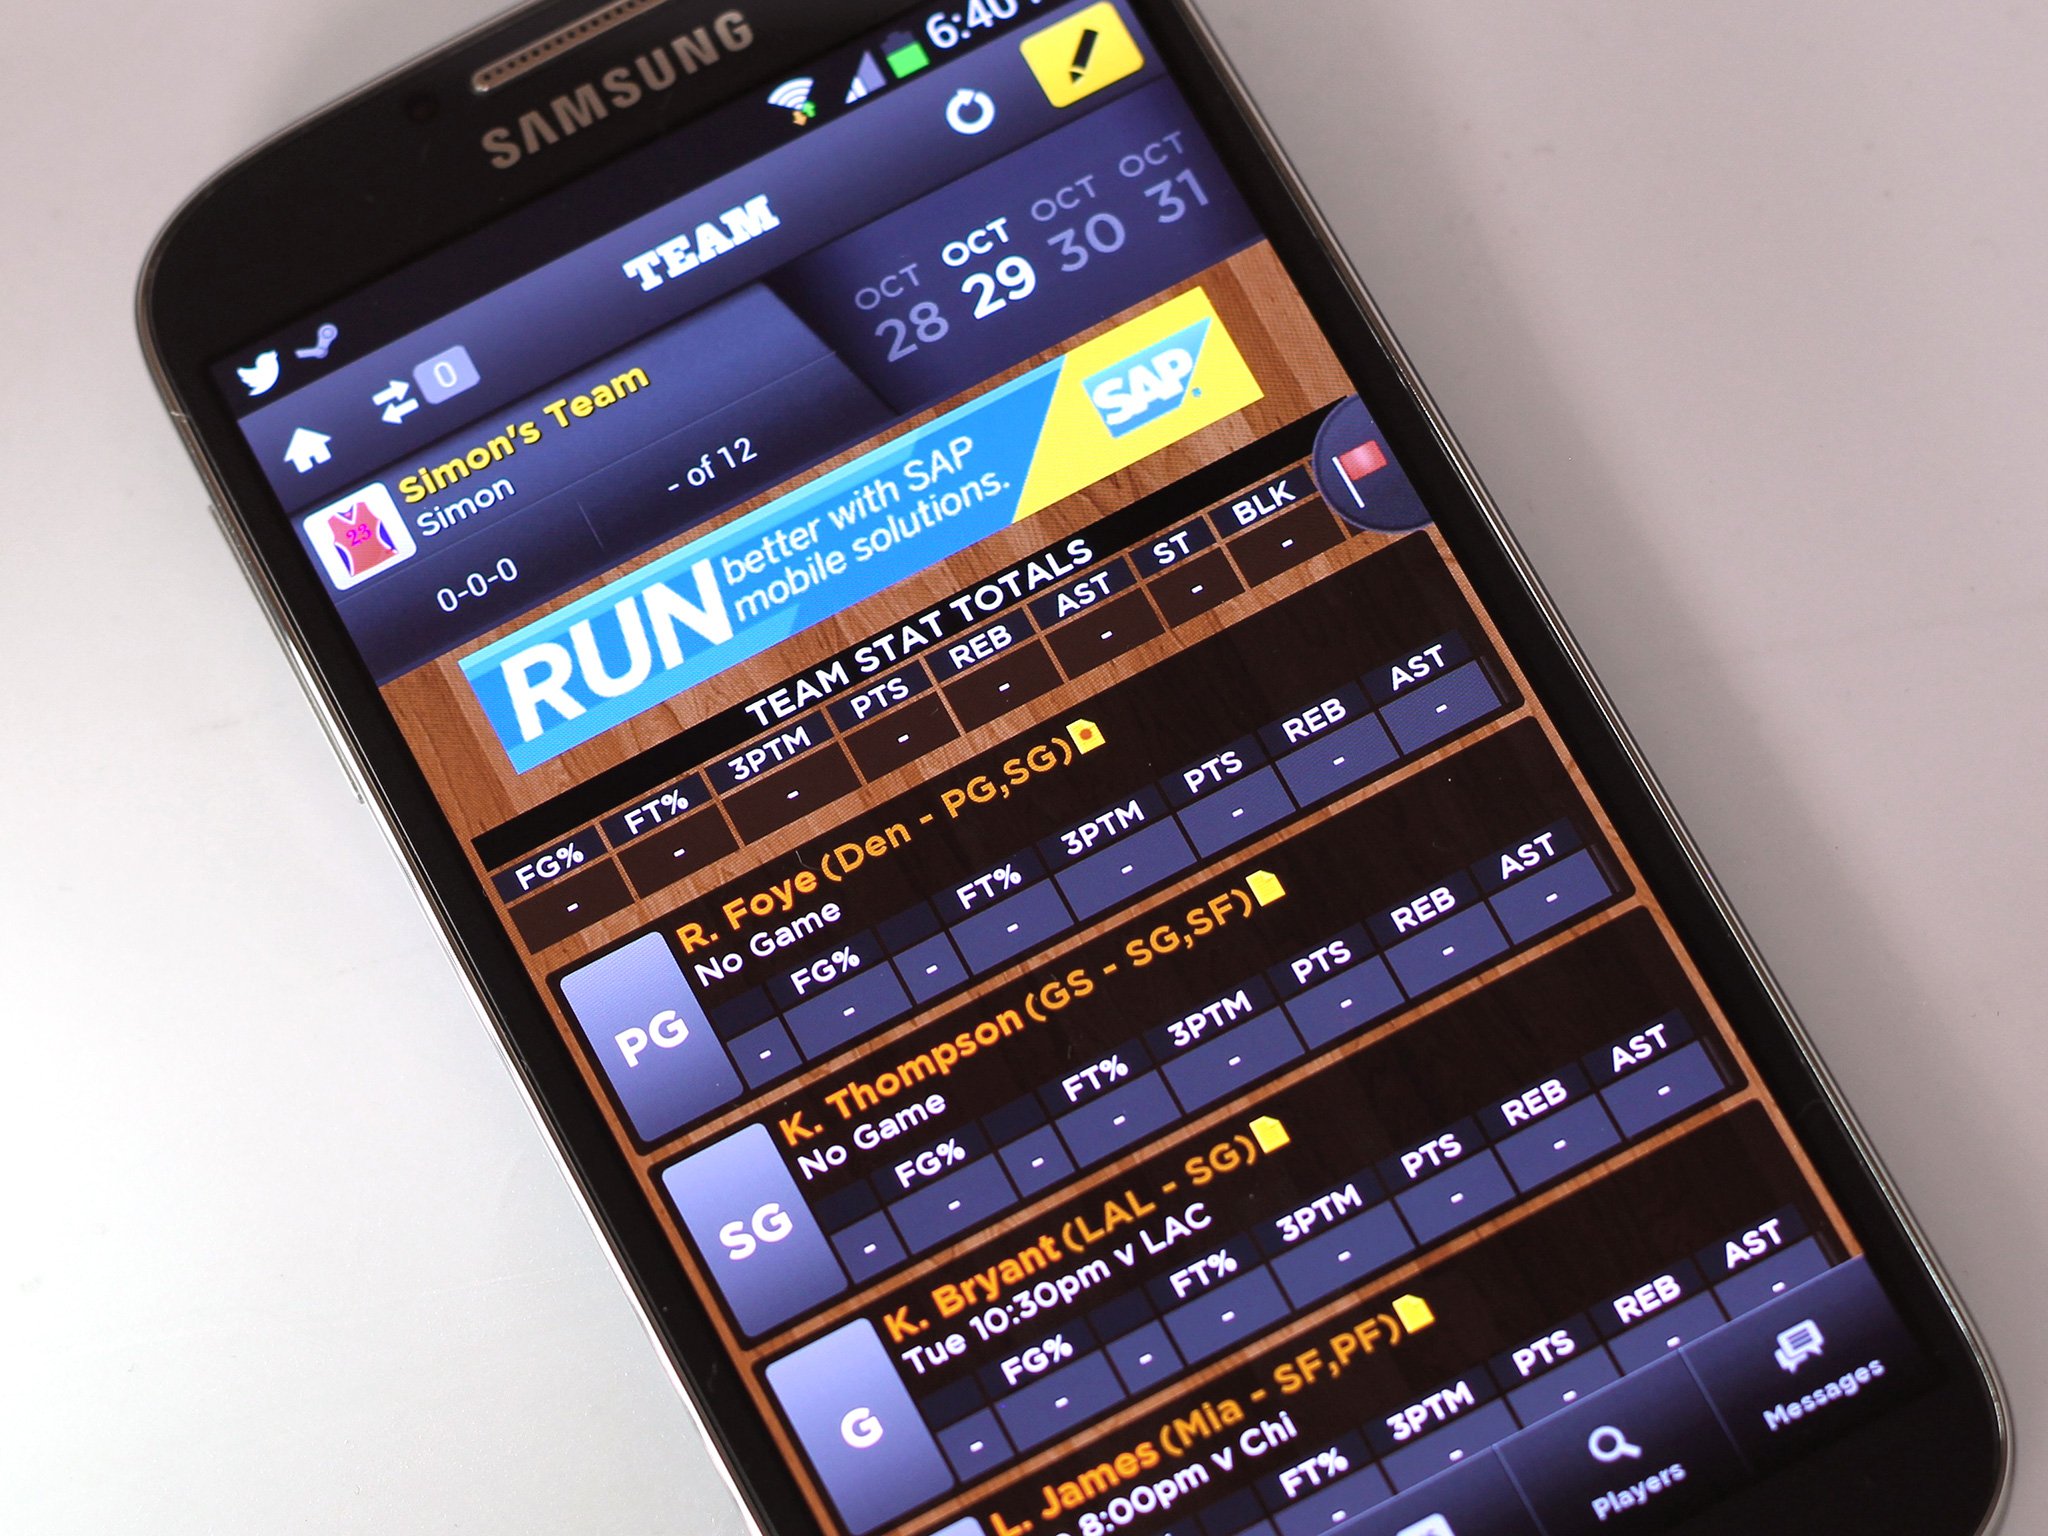 March Madness: The best Android apps for following The NCAA Basketball